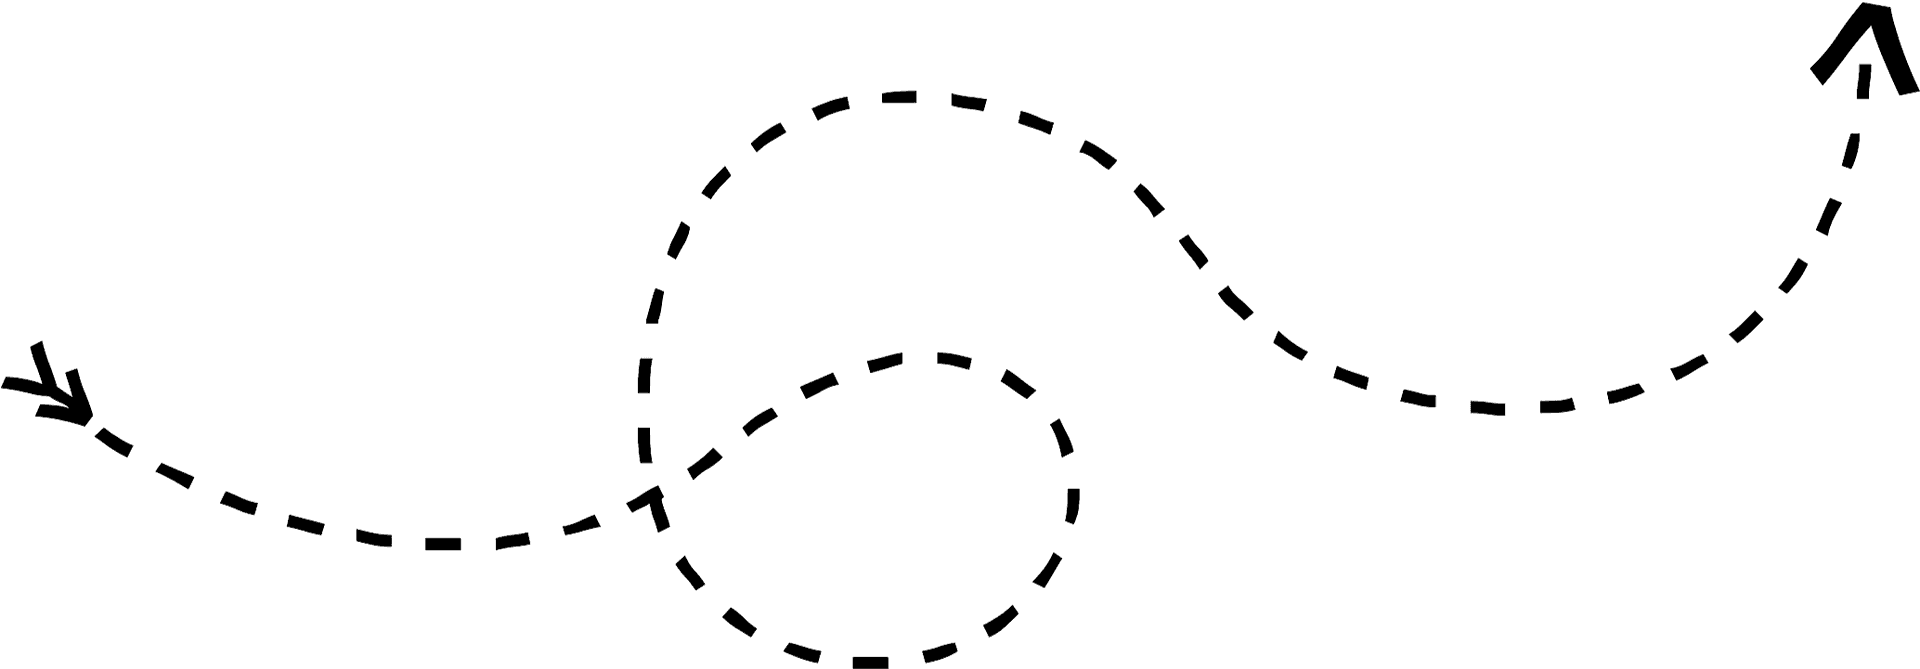 Dashed Line Tumblr Arrow PNG